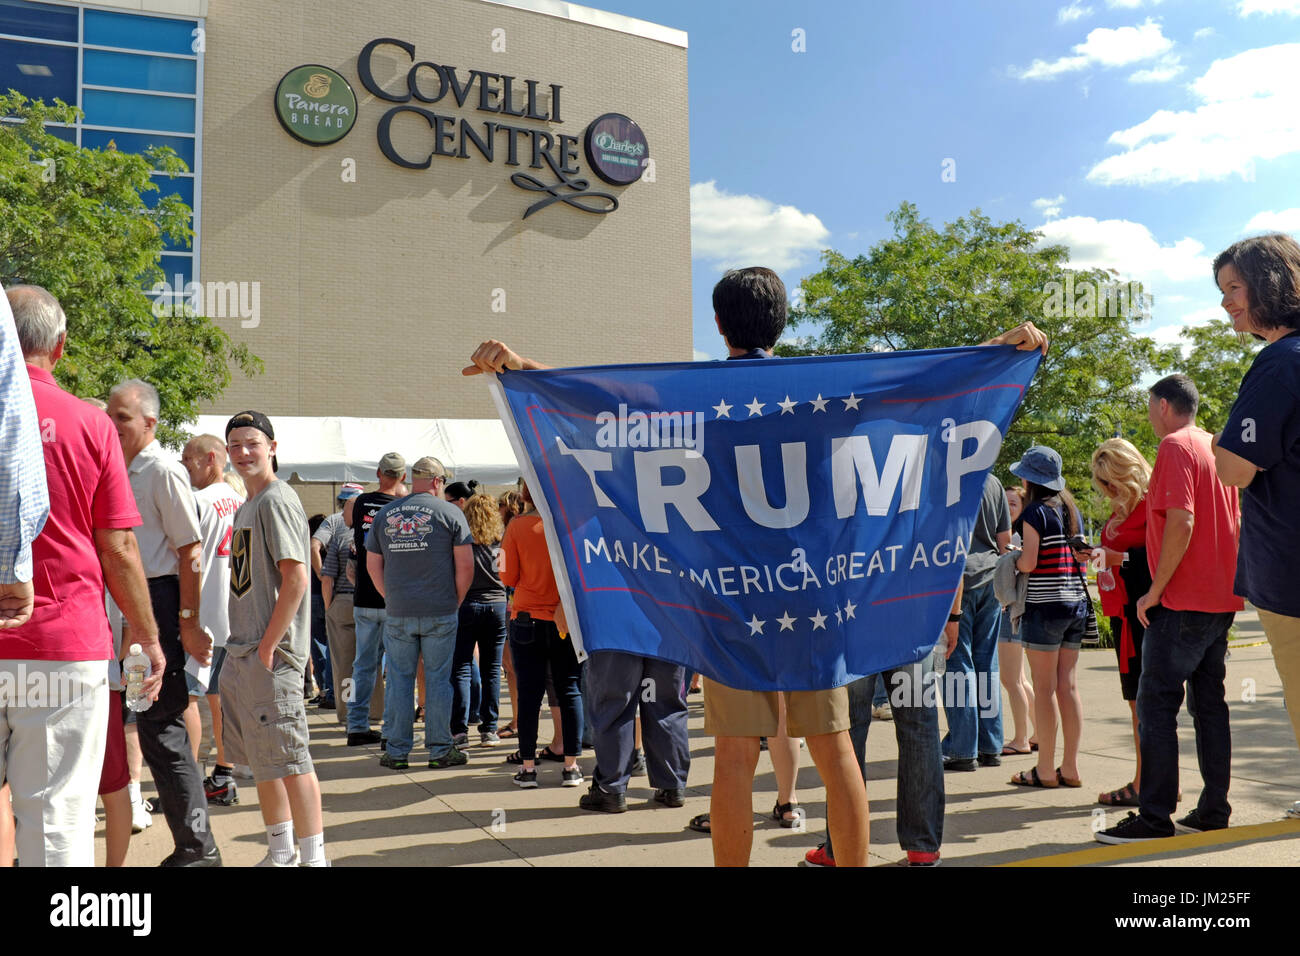 Youngstown, Ohio, USA. 25th July, 2017. Man stands with his Trump 'Make America Great Again' banner while he waits with other Trump supporters to enter the Covelli Centre in Youngstown, Ohio for a political rally on July 25, 2017. Credit: Mark Kanning/Alamy Live News Stock Photo